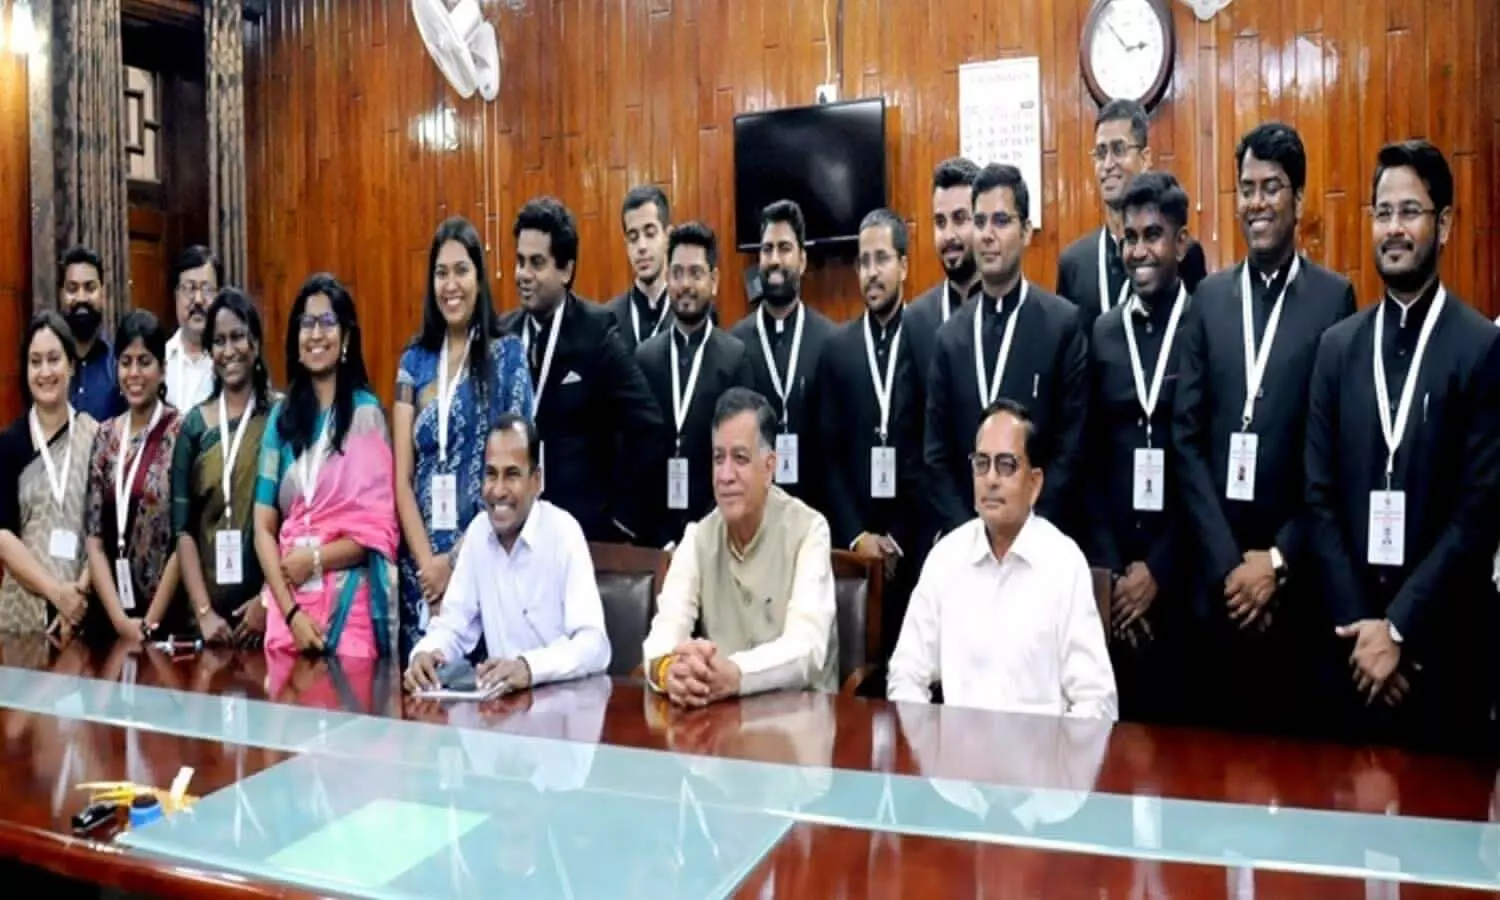 Assembly speaker Satish Mahana told the new administrative officers, maintain the publics trust as well